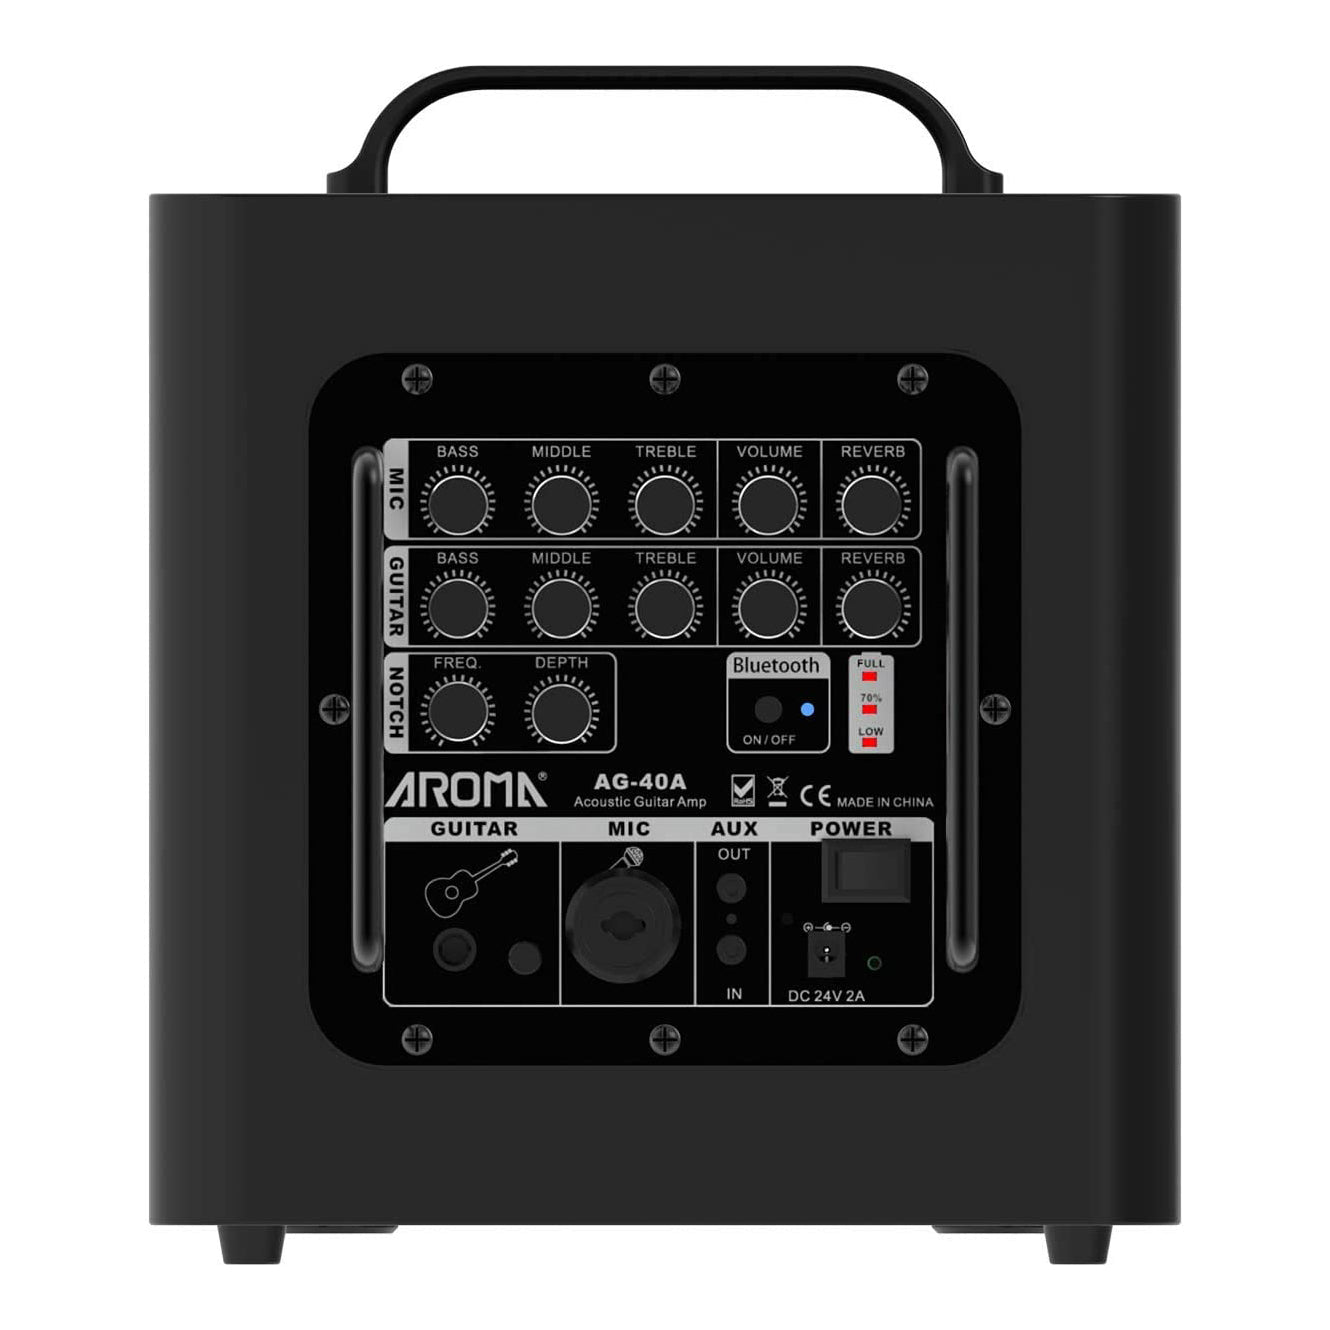 Aroma AG-40A 40W Portable Acoustic Guitar Amplifier/Micro PA or Monitor (Black) with Built-in Rechargeable Battery and Bluetooth